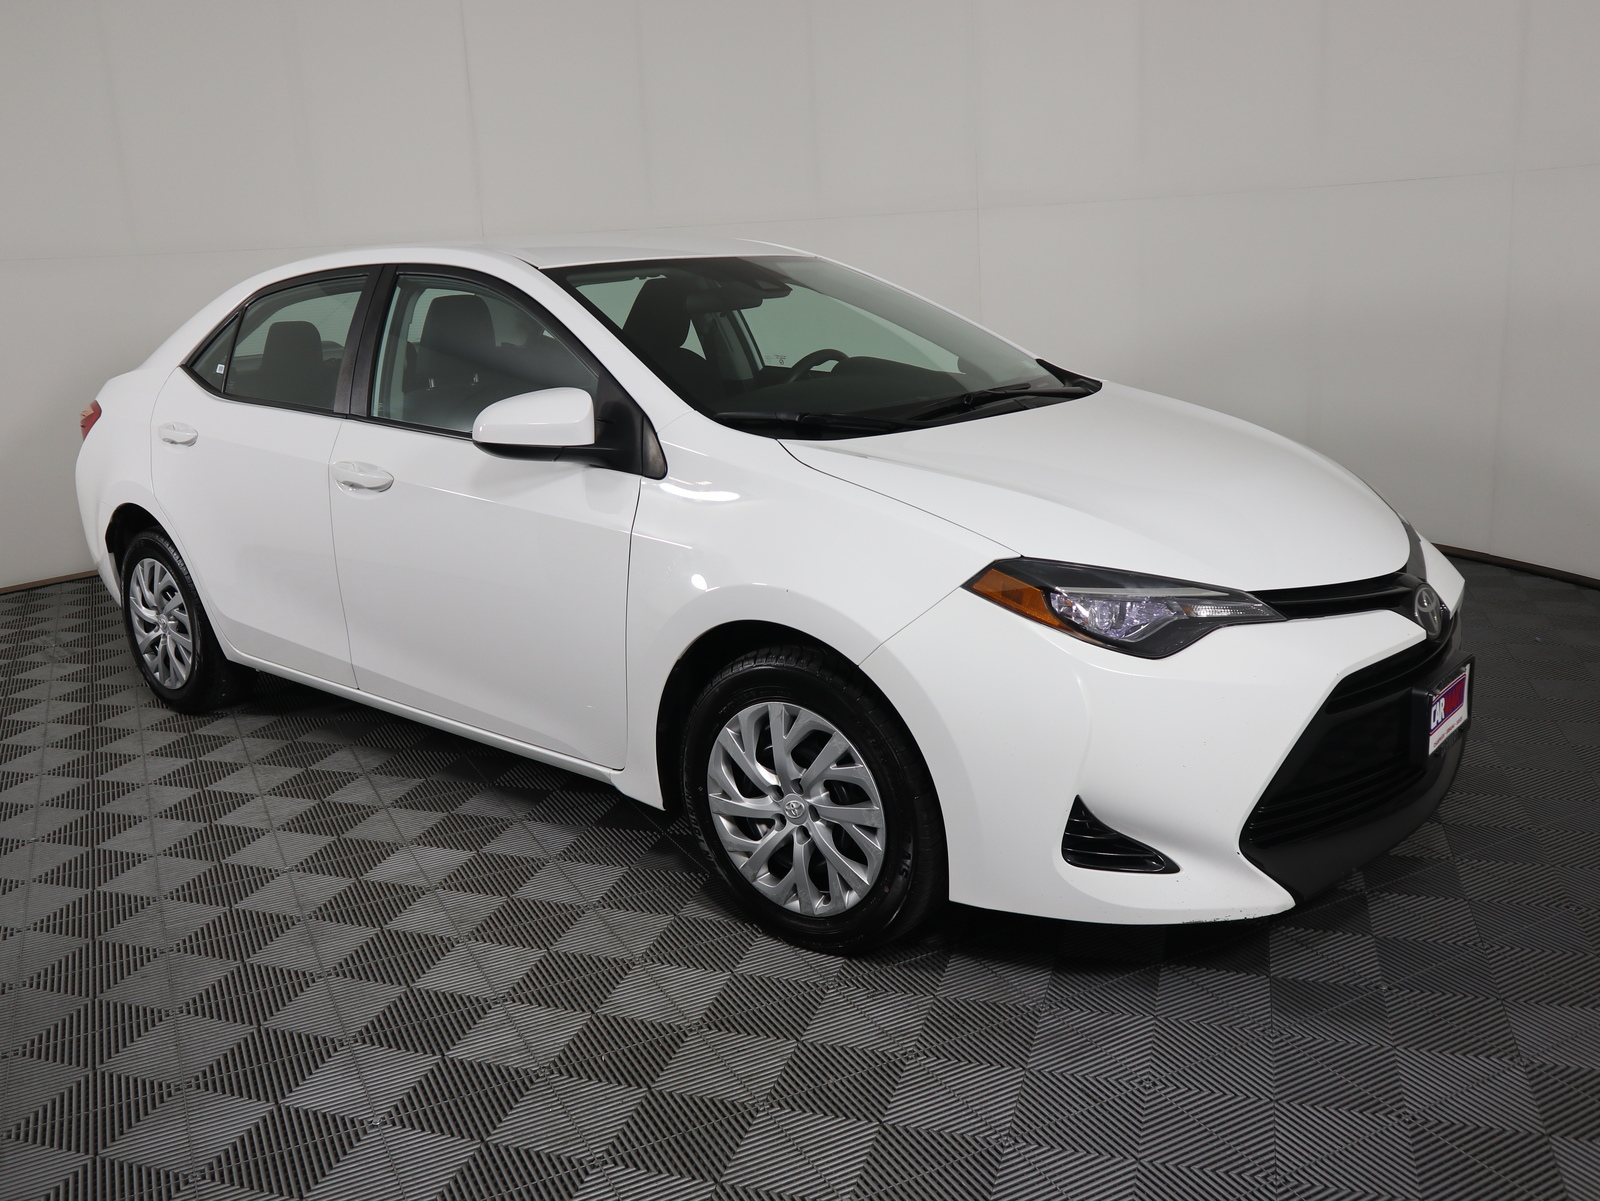 PreOwned 2017 Toyota Corolla LE CVT 4dr Car in Savoy 